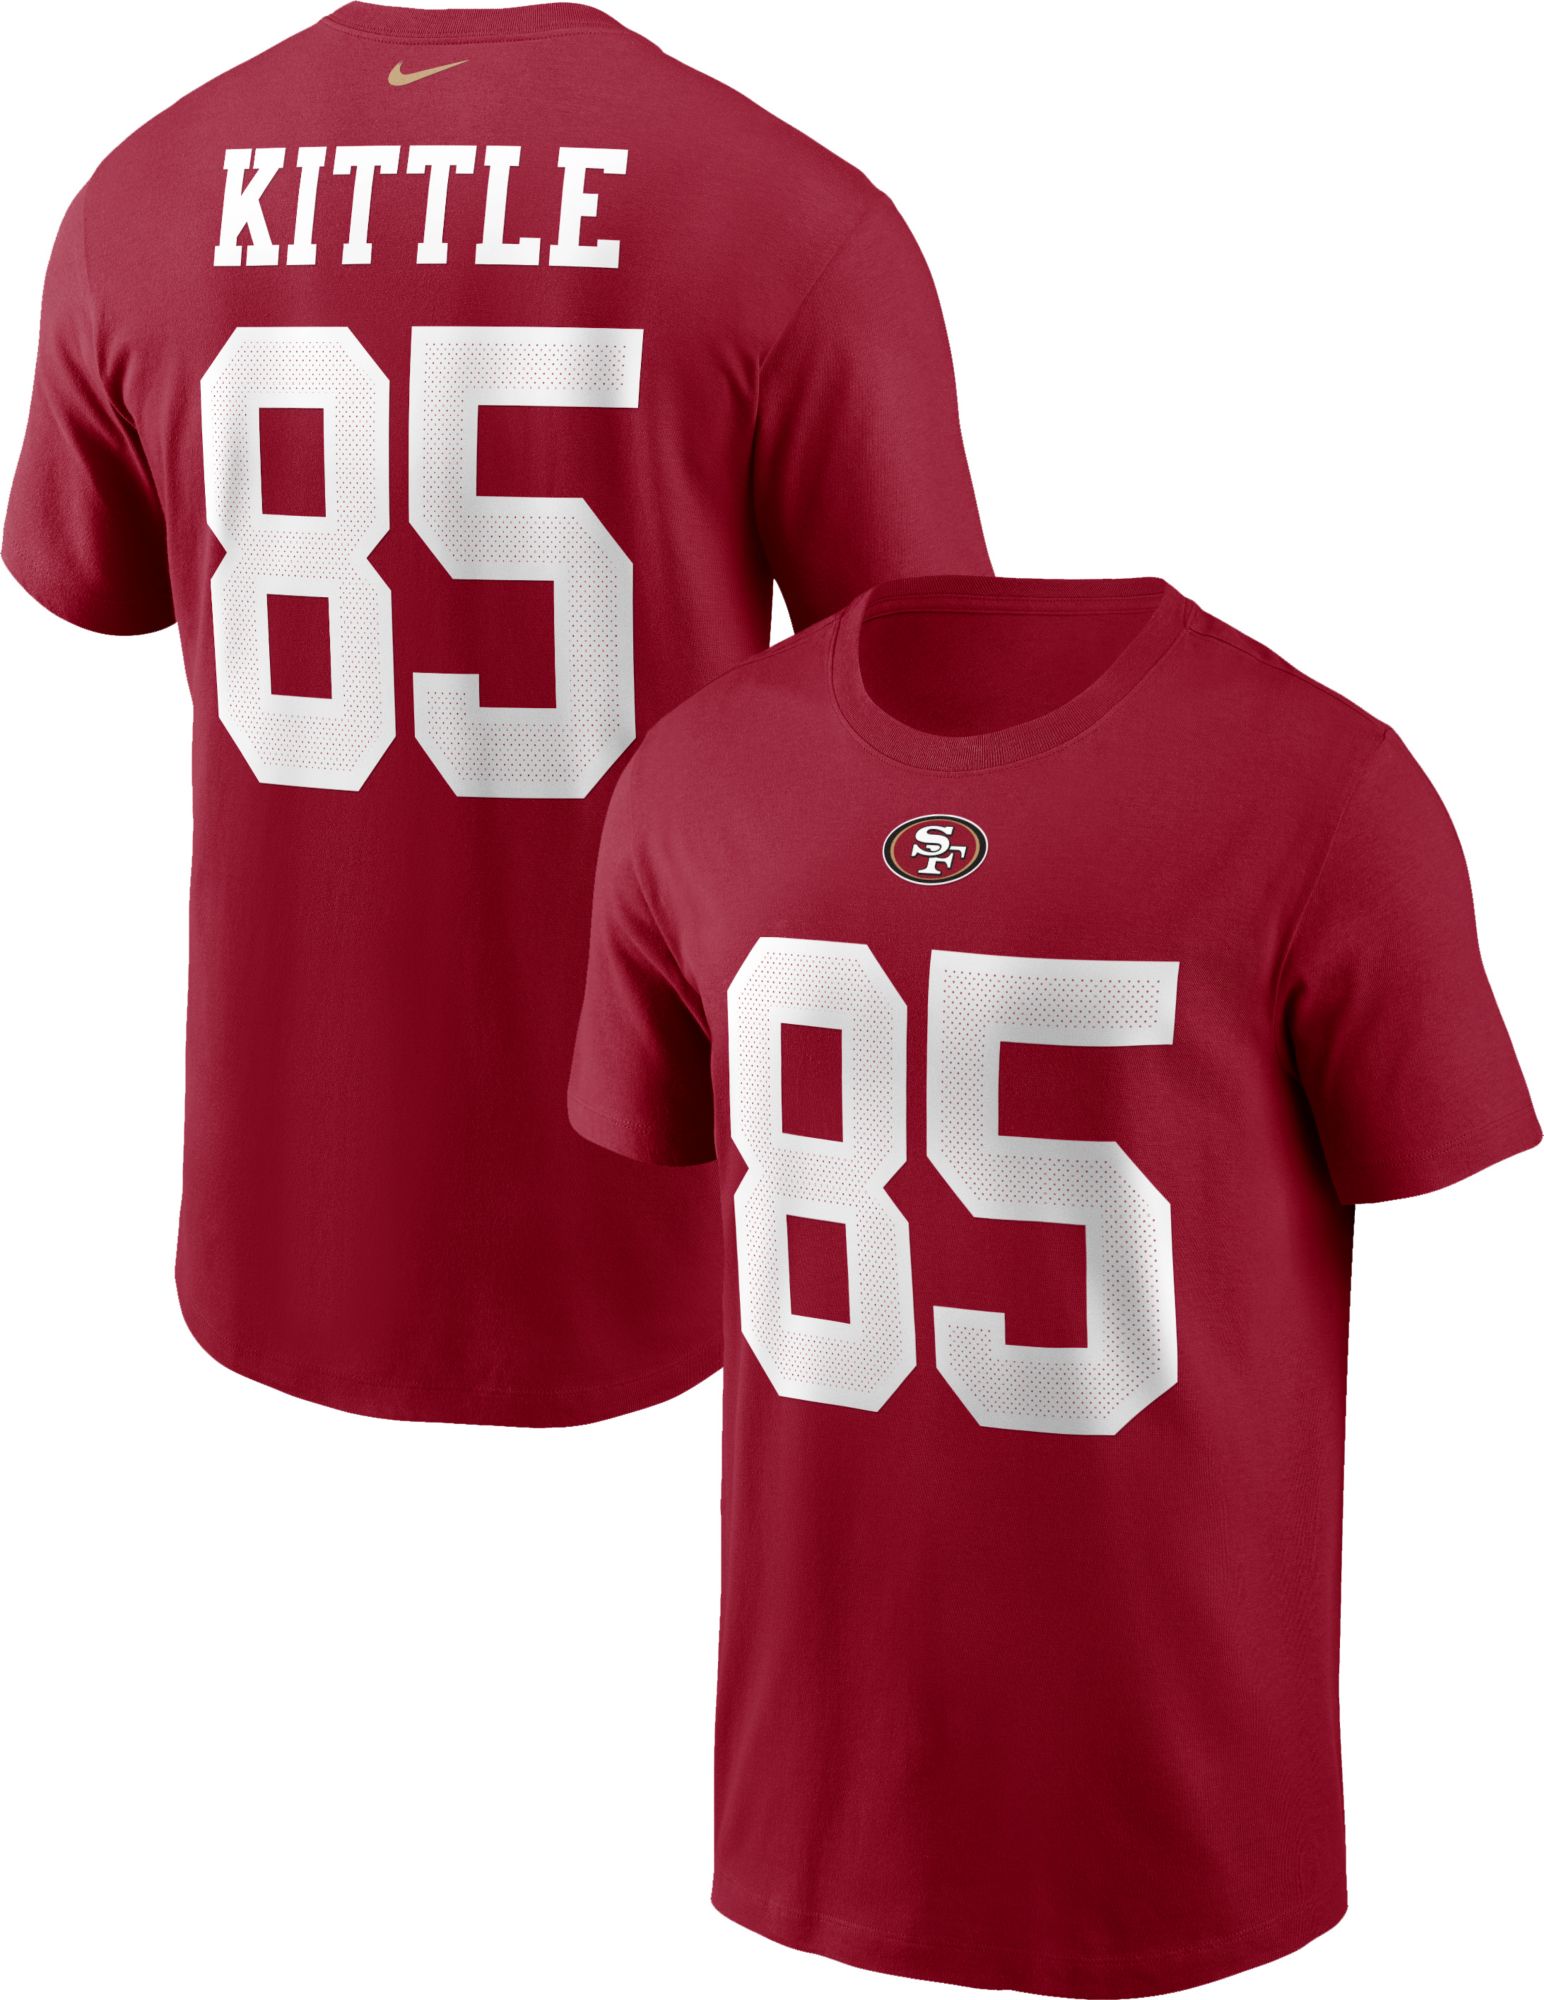 49ers jersey 85